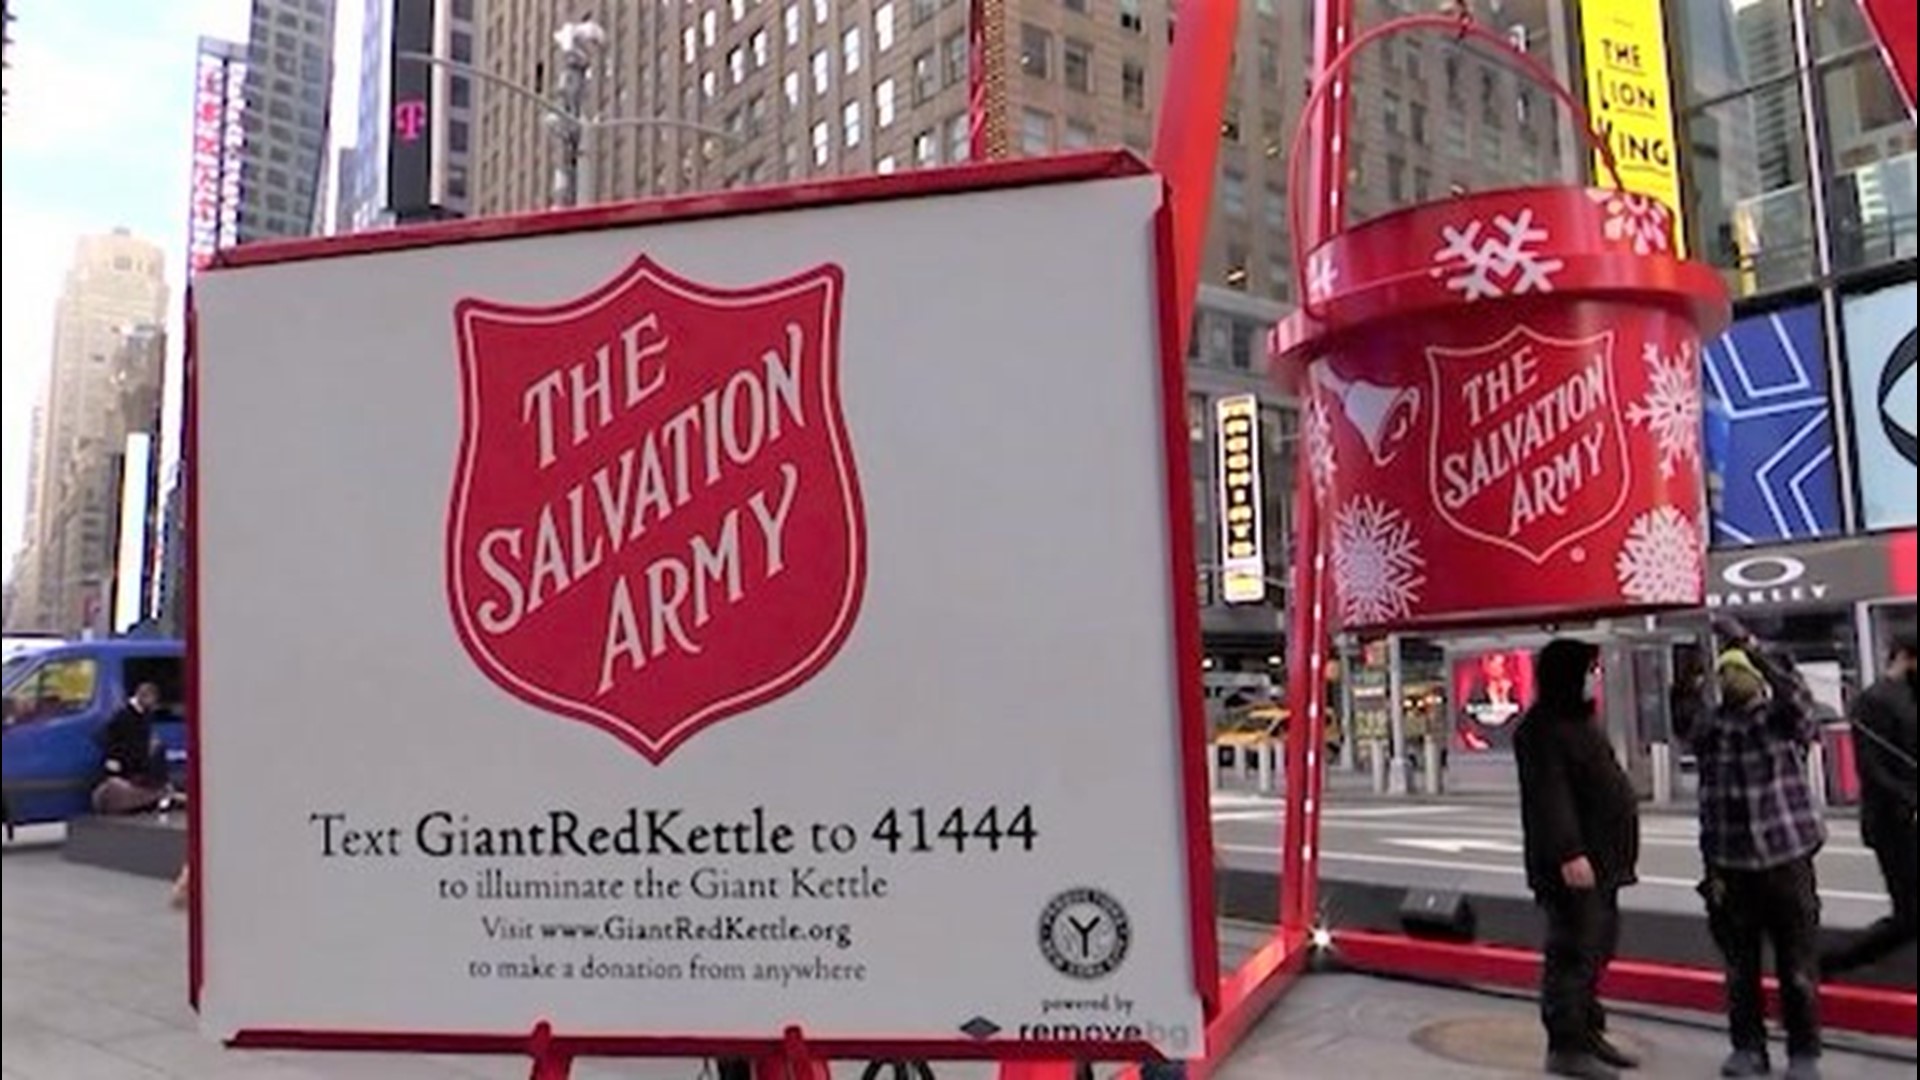 For Giving Tuesday, the Salvation Army set up the world's largest kettle in New York, New York, on Dec. 1 for donations to help those in need during the holidays.